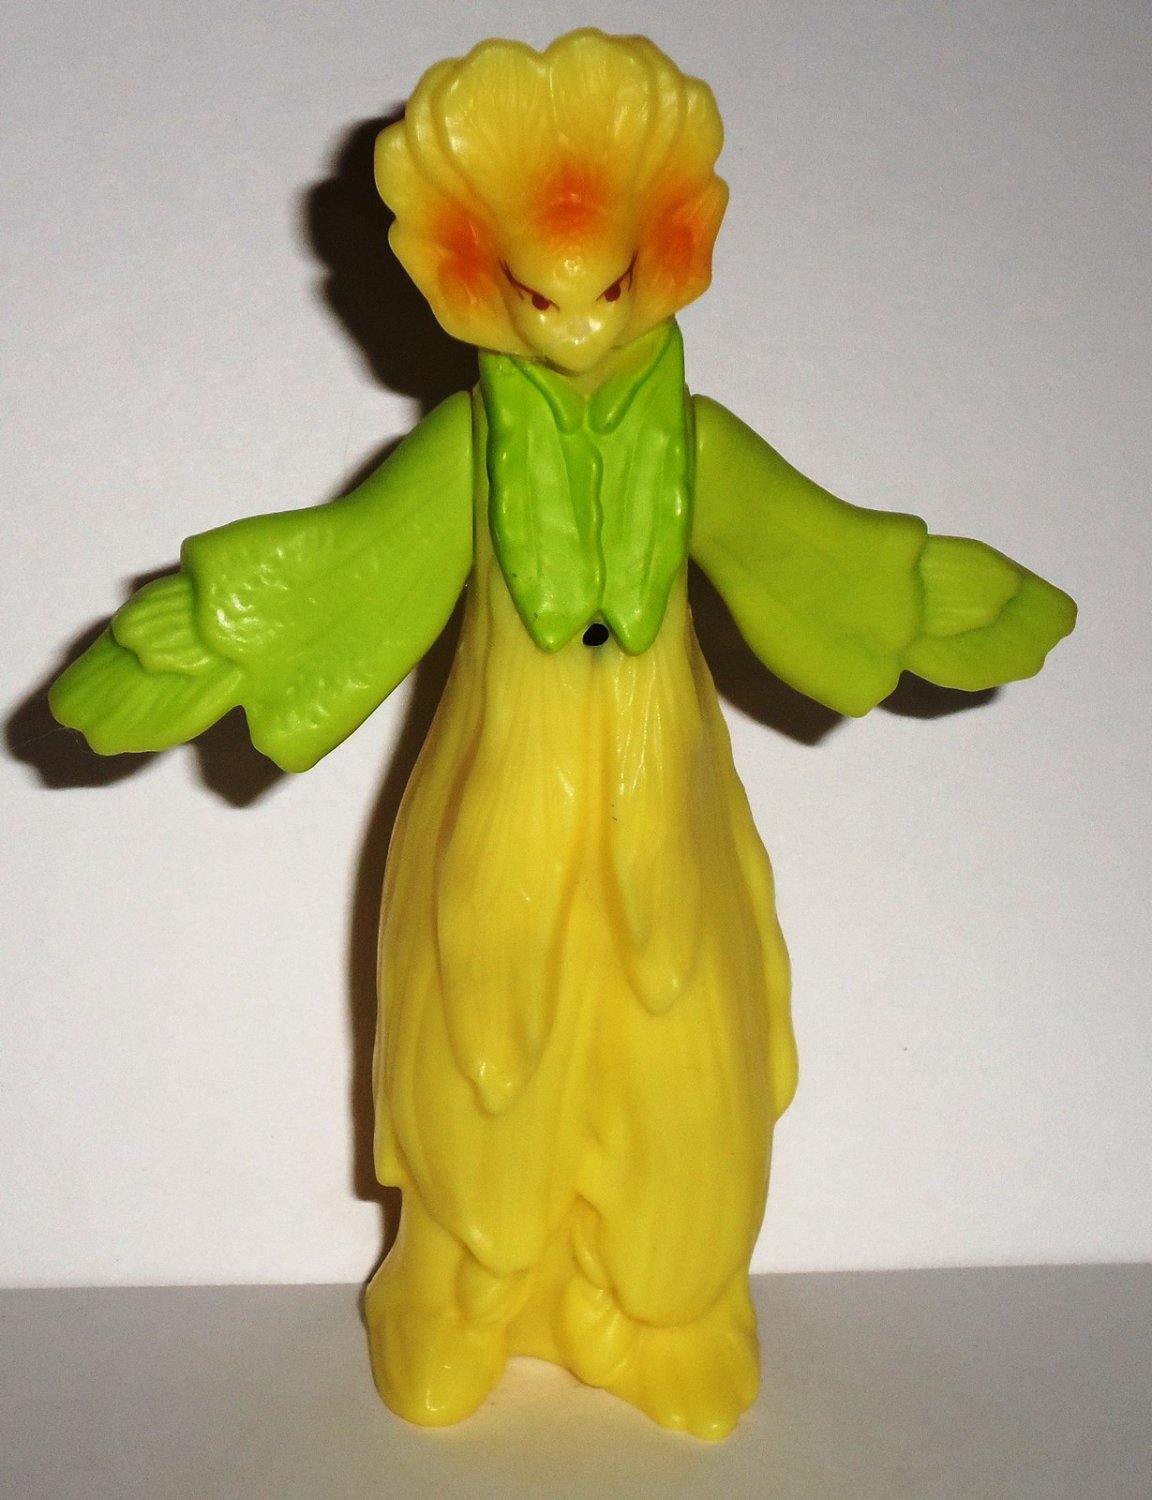 Flower Sprite #7 2008 The Spiderwick Chronicles McDonalds Happy Meal Toy 